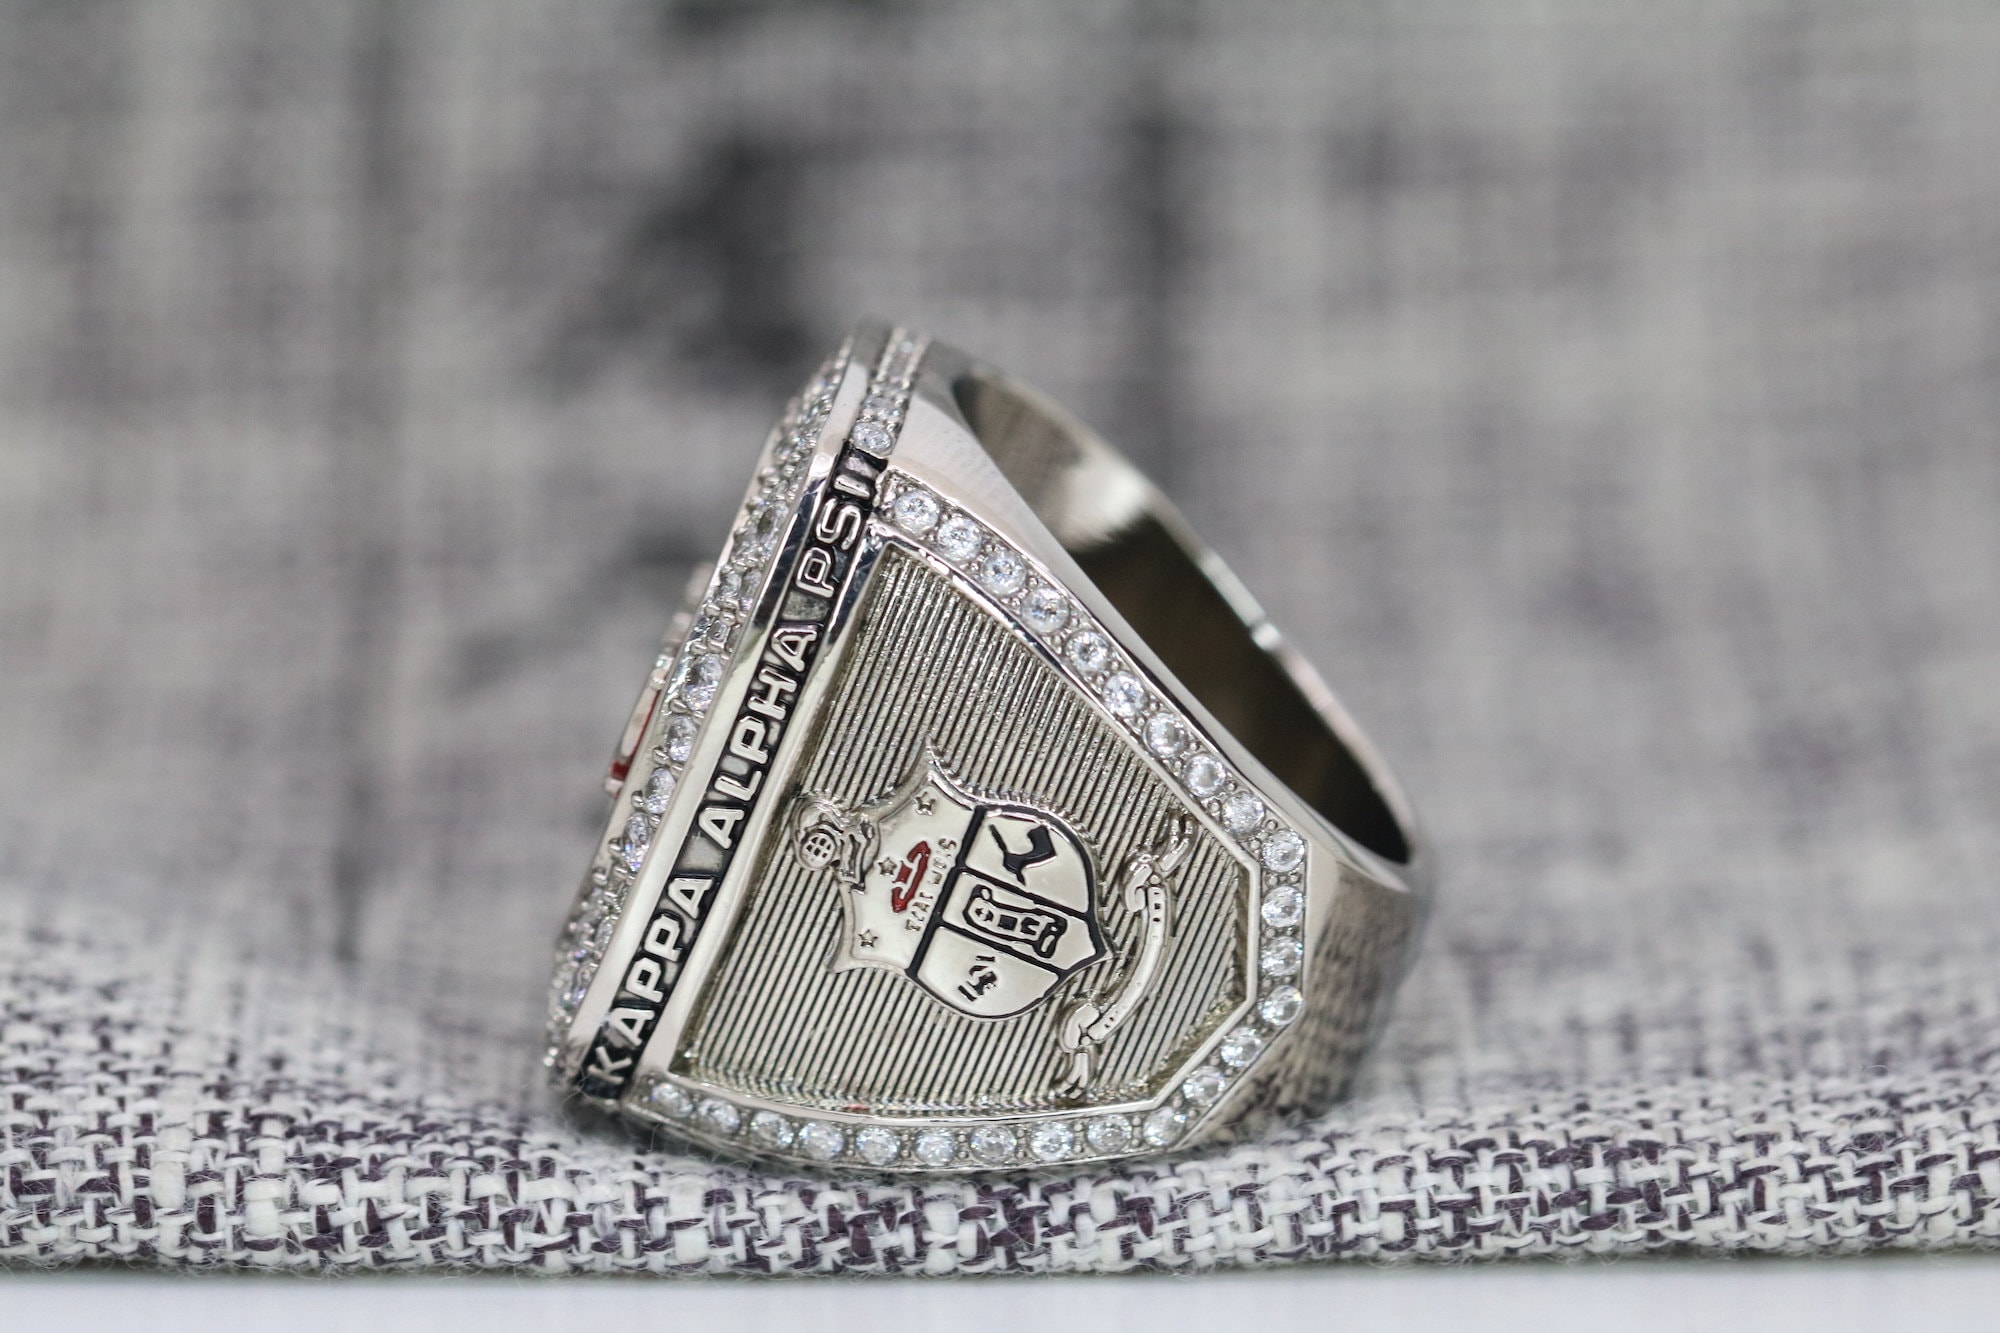 Kappa Alpha Psi Fraternity Sterling Silver Ring with Symbol | eBay